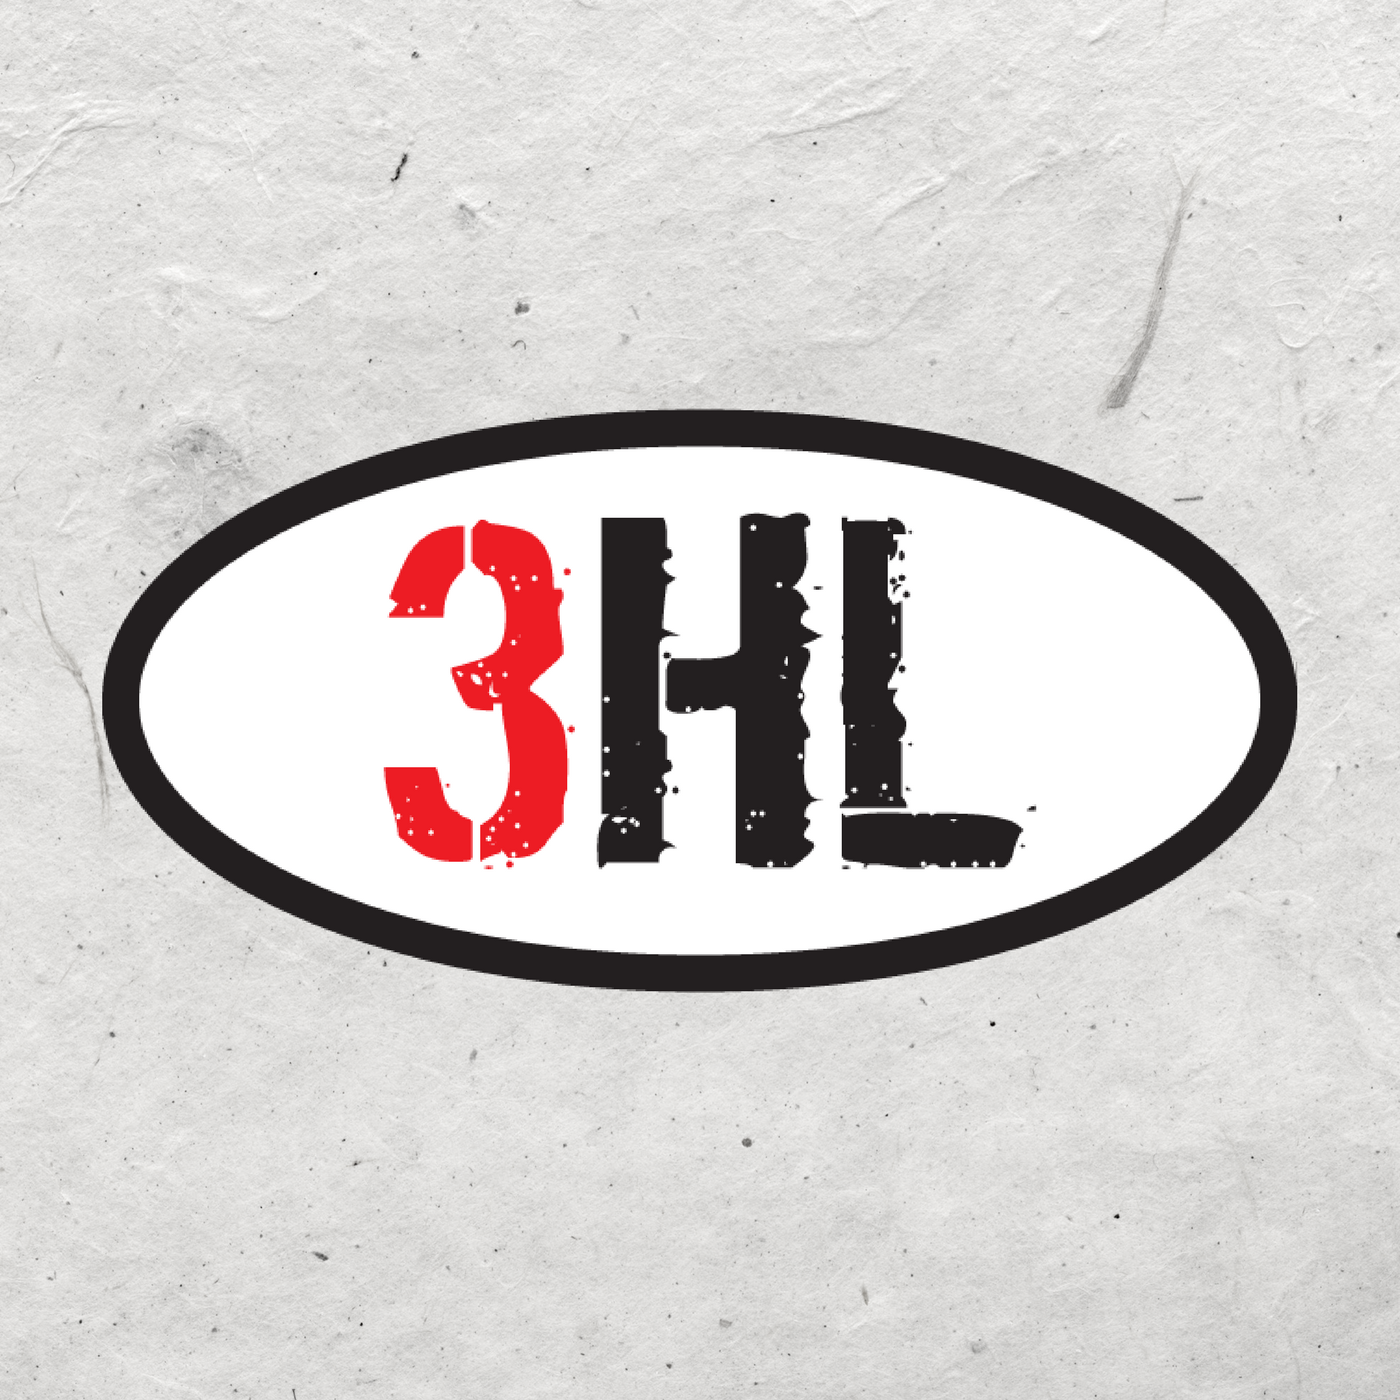 Chris Low on 3HL - Talking CFB branding News, CWS and More